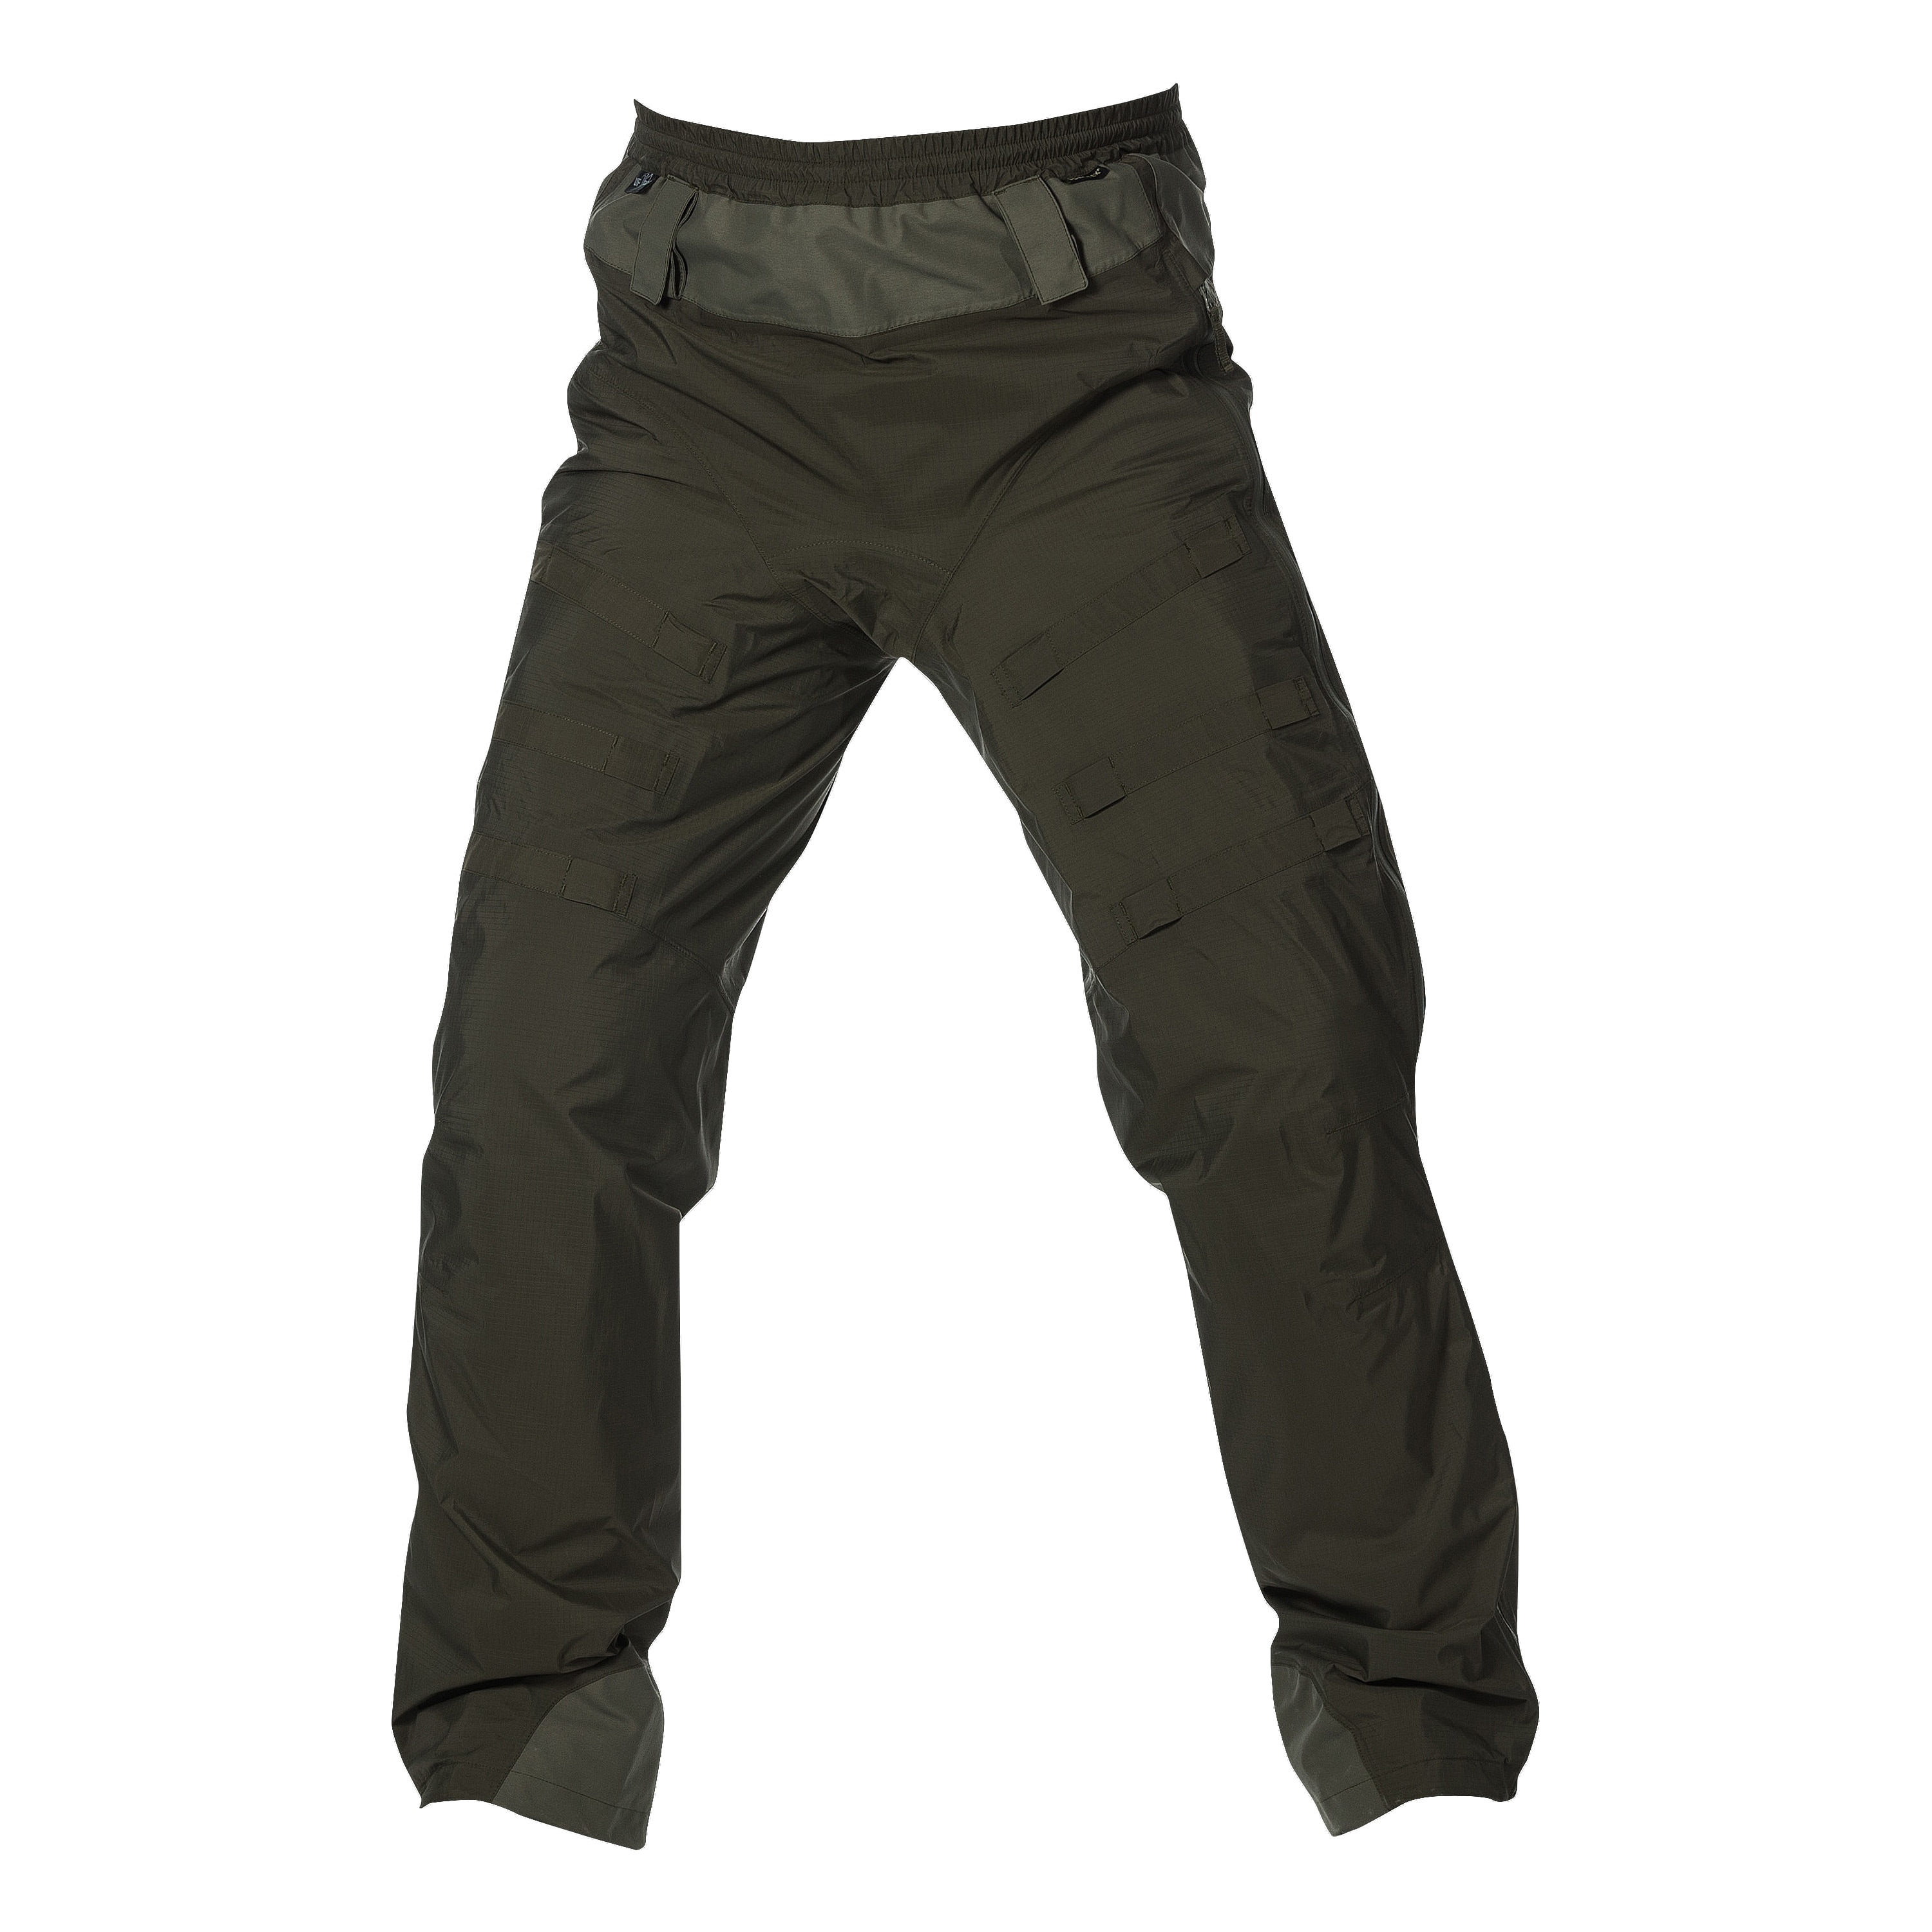 Purchase the UF Pro Rain Pants Monsoon Smallpac olive by ASMC